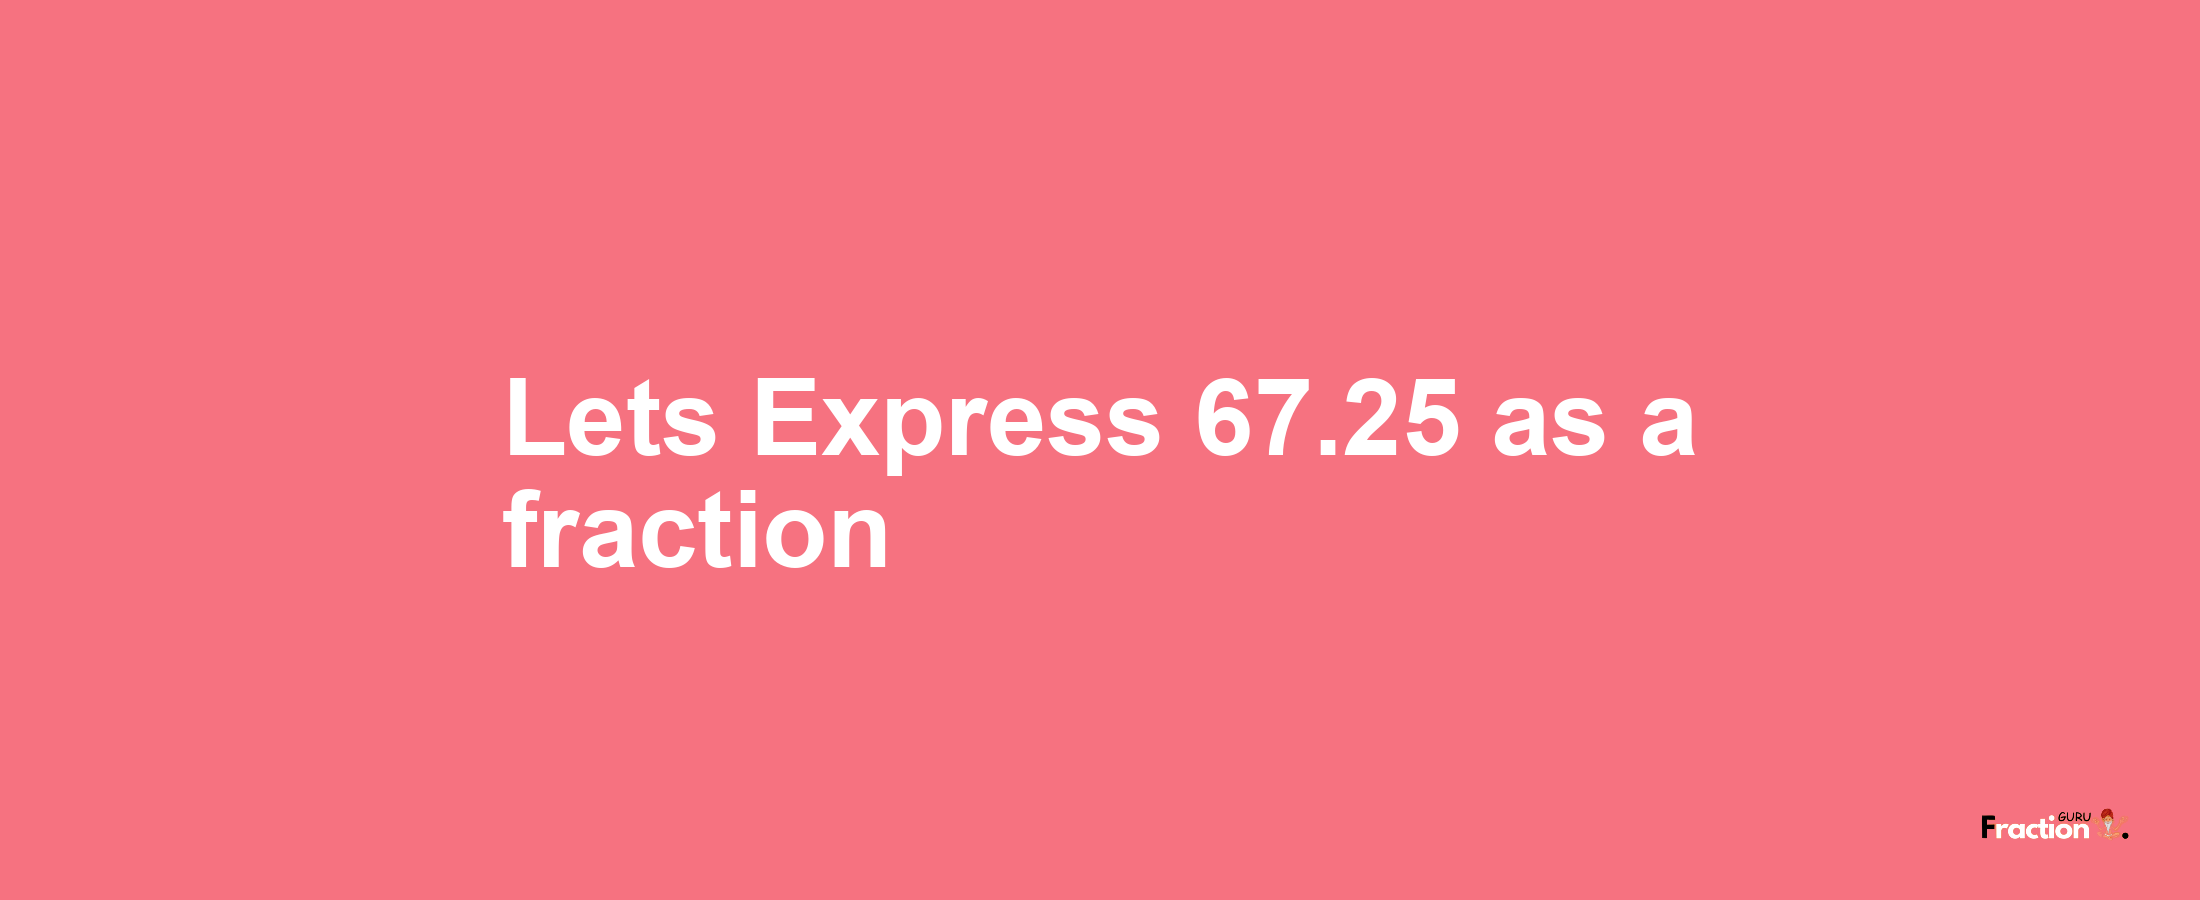 Lets Express 67.25 as afraction